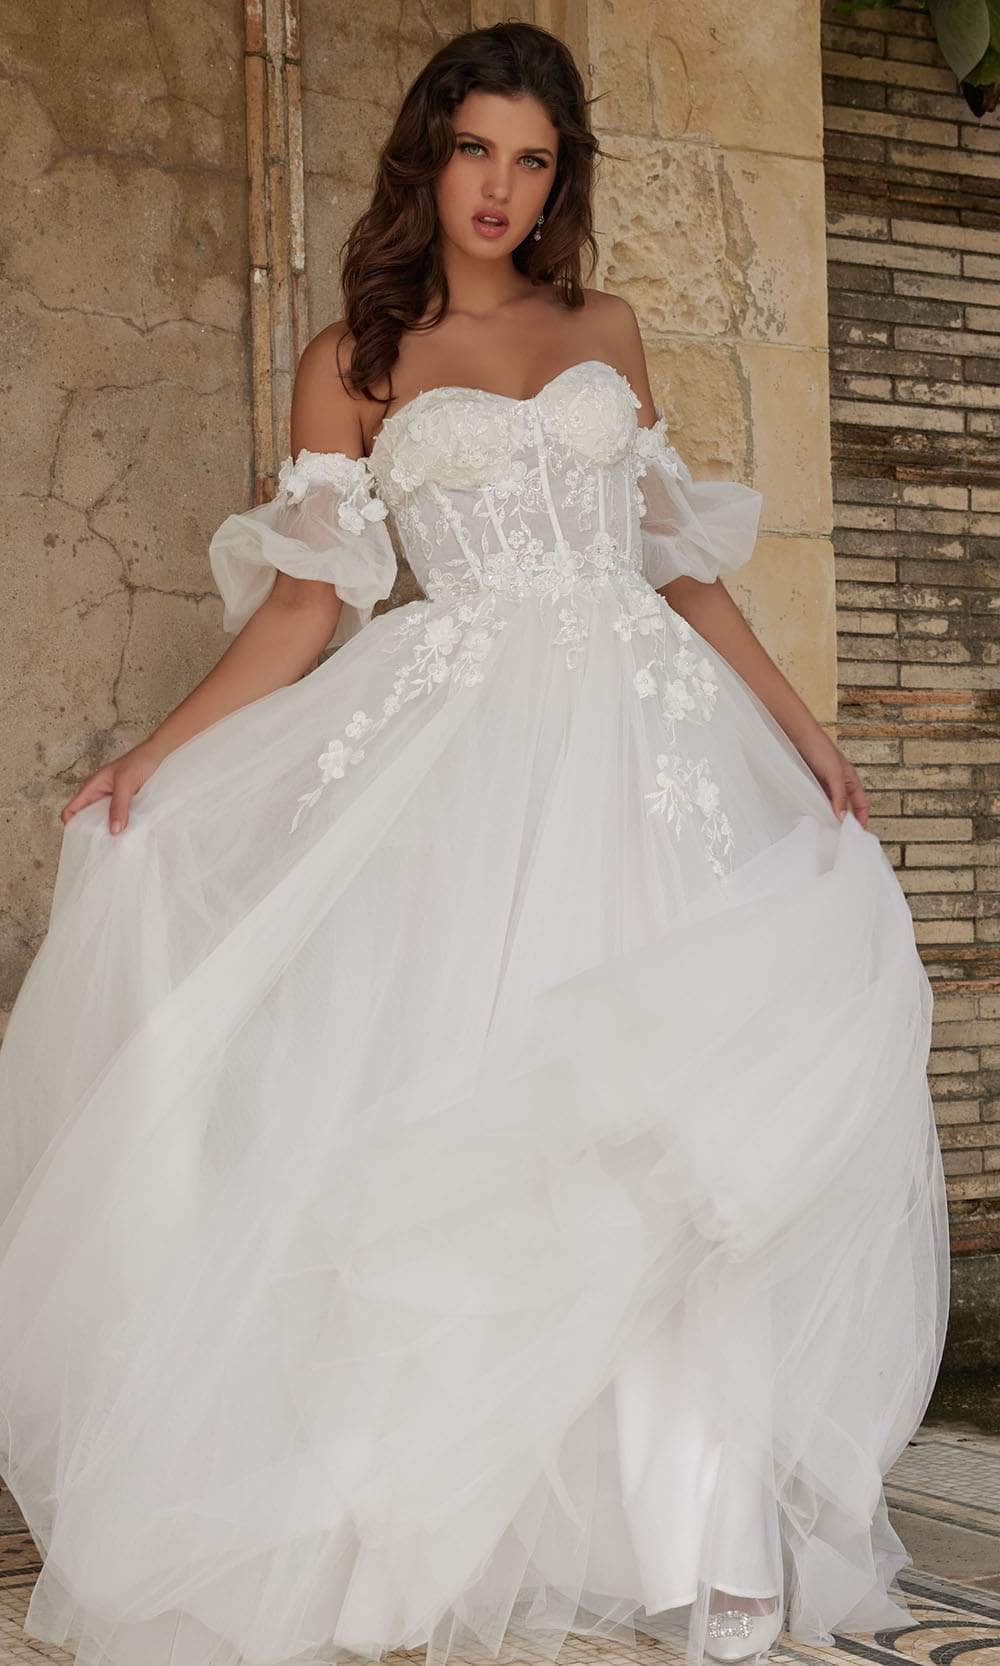 Image of Jovani Bridal JB23693 - Puffed Sleeve A-Line Bridal Gown